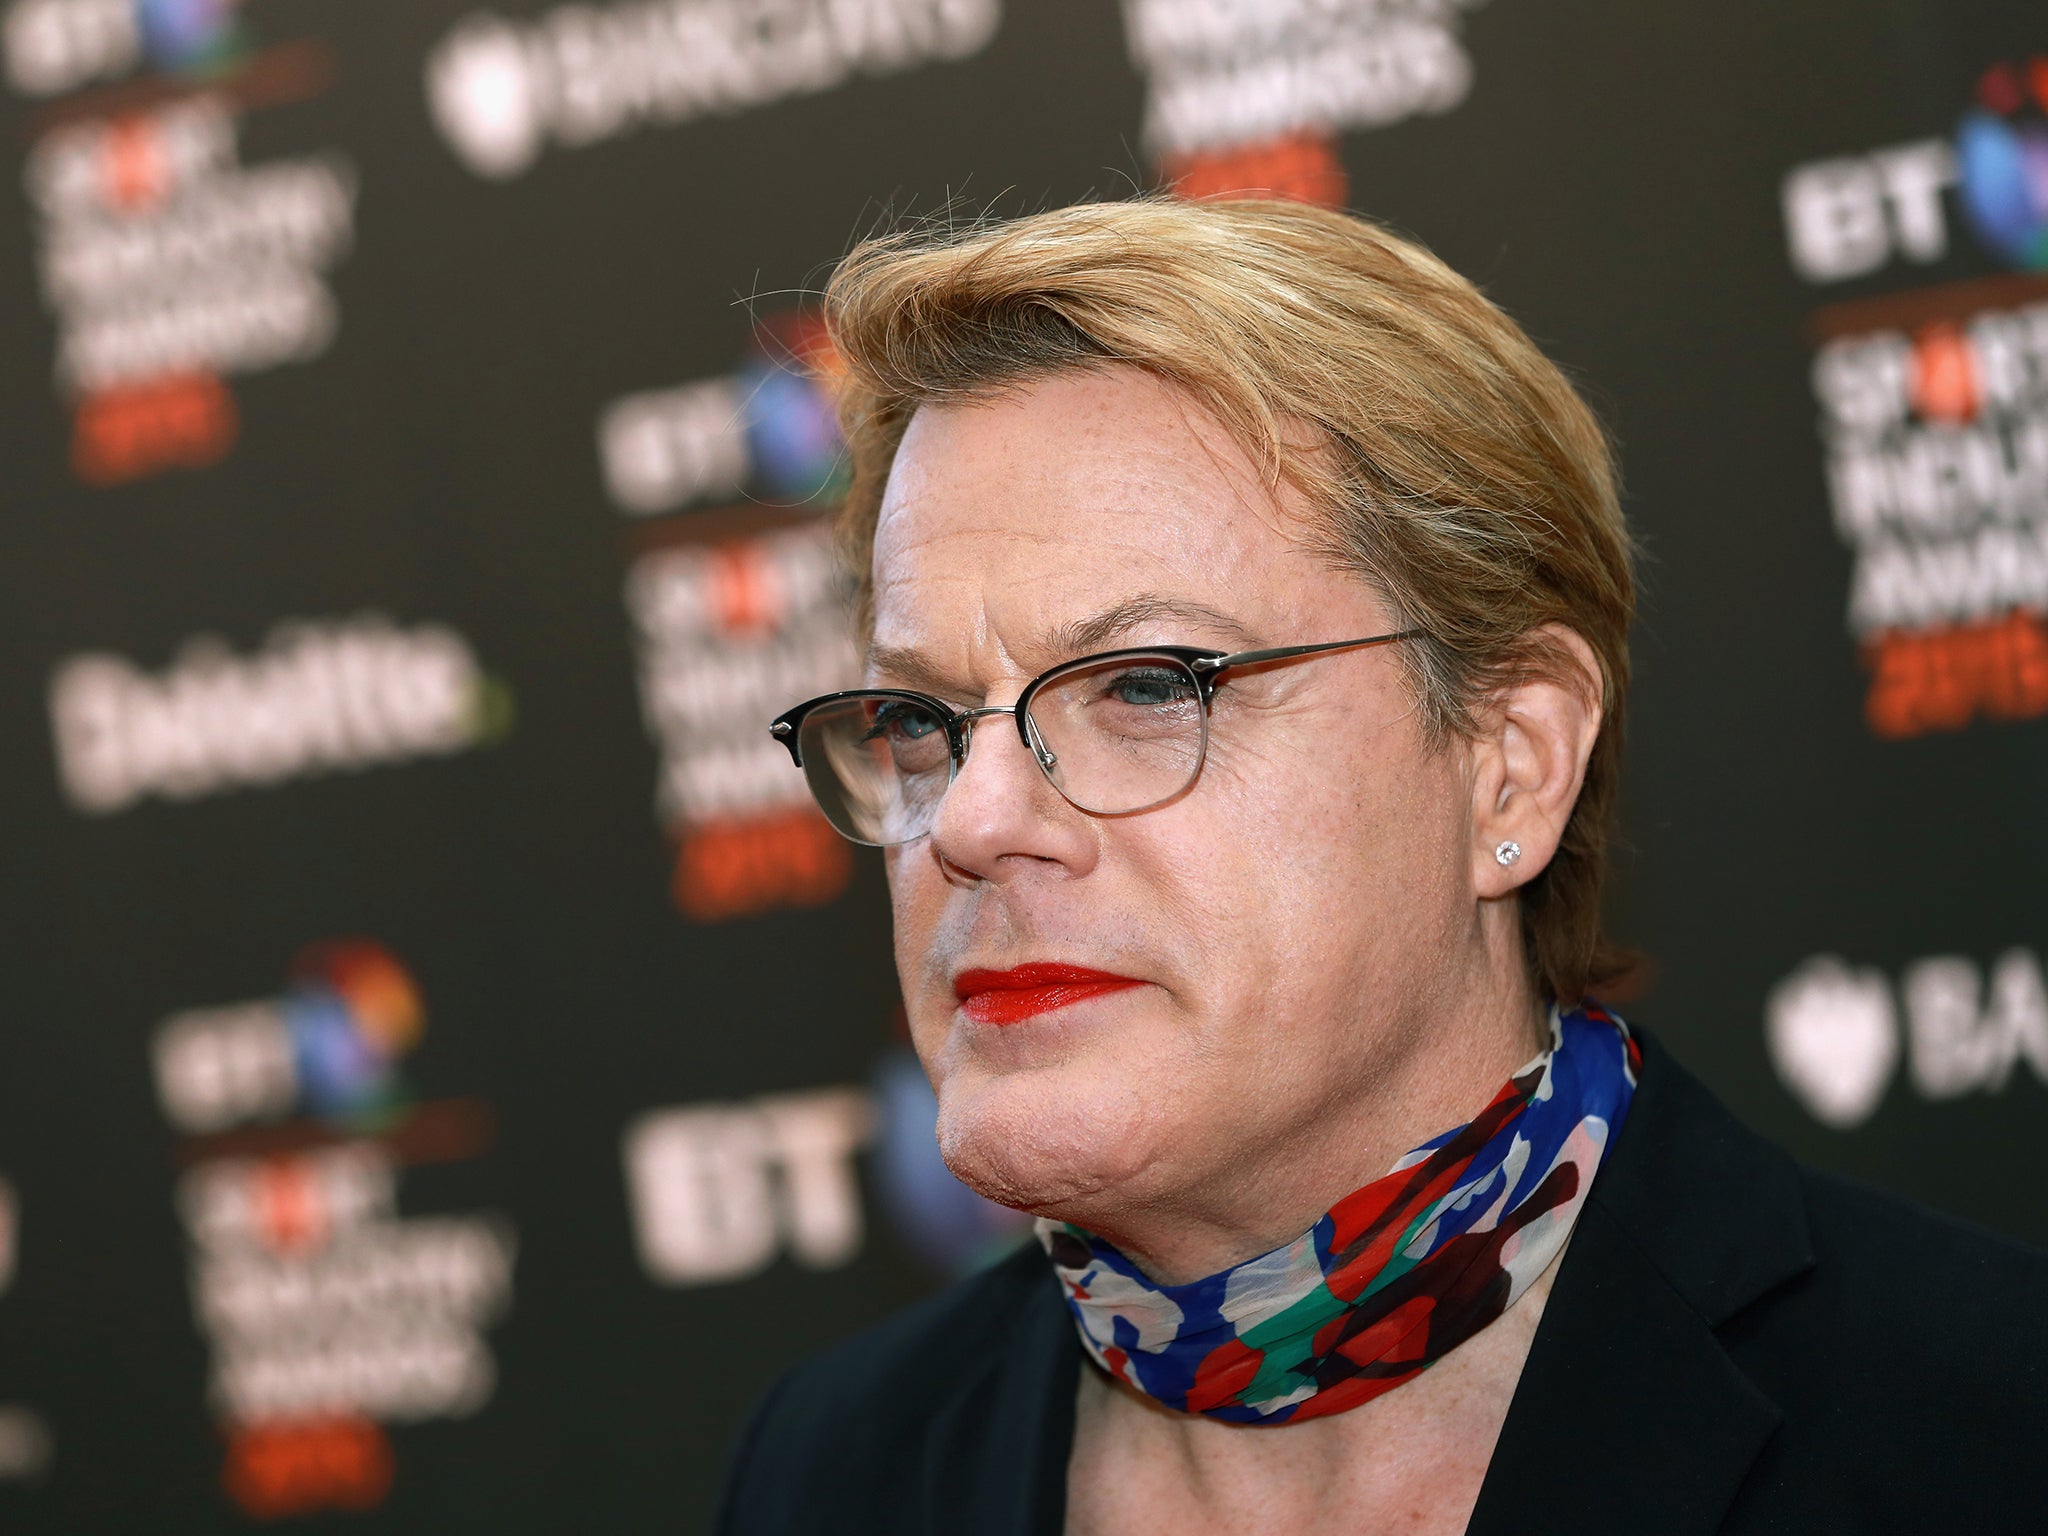 Eddie izzard went to court to make a stand for the rights of lgbt people